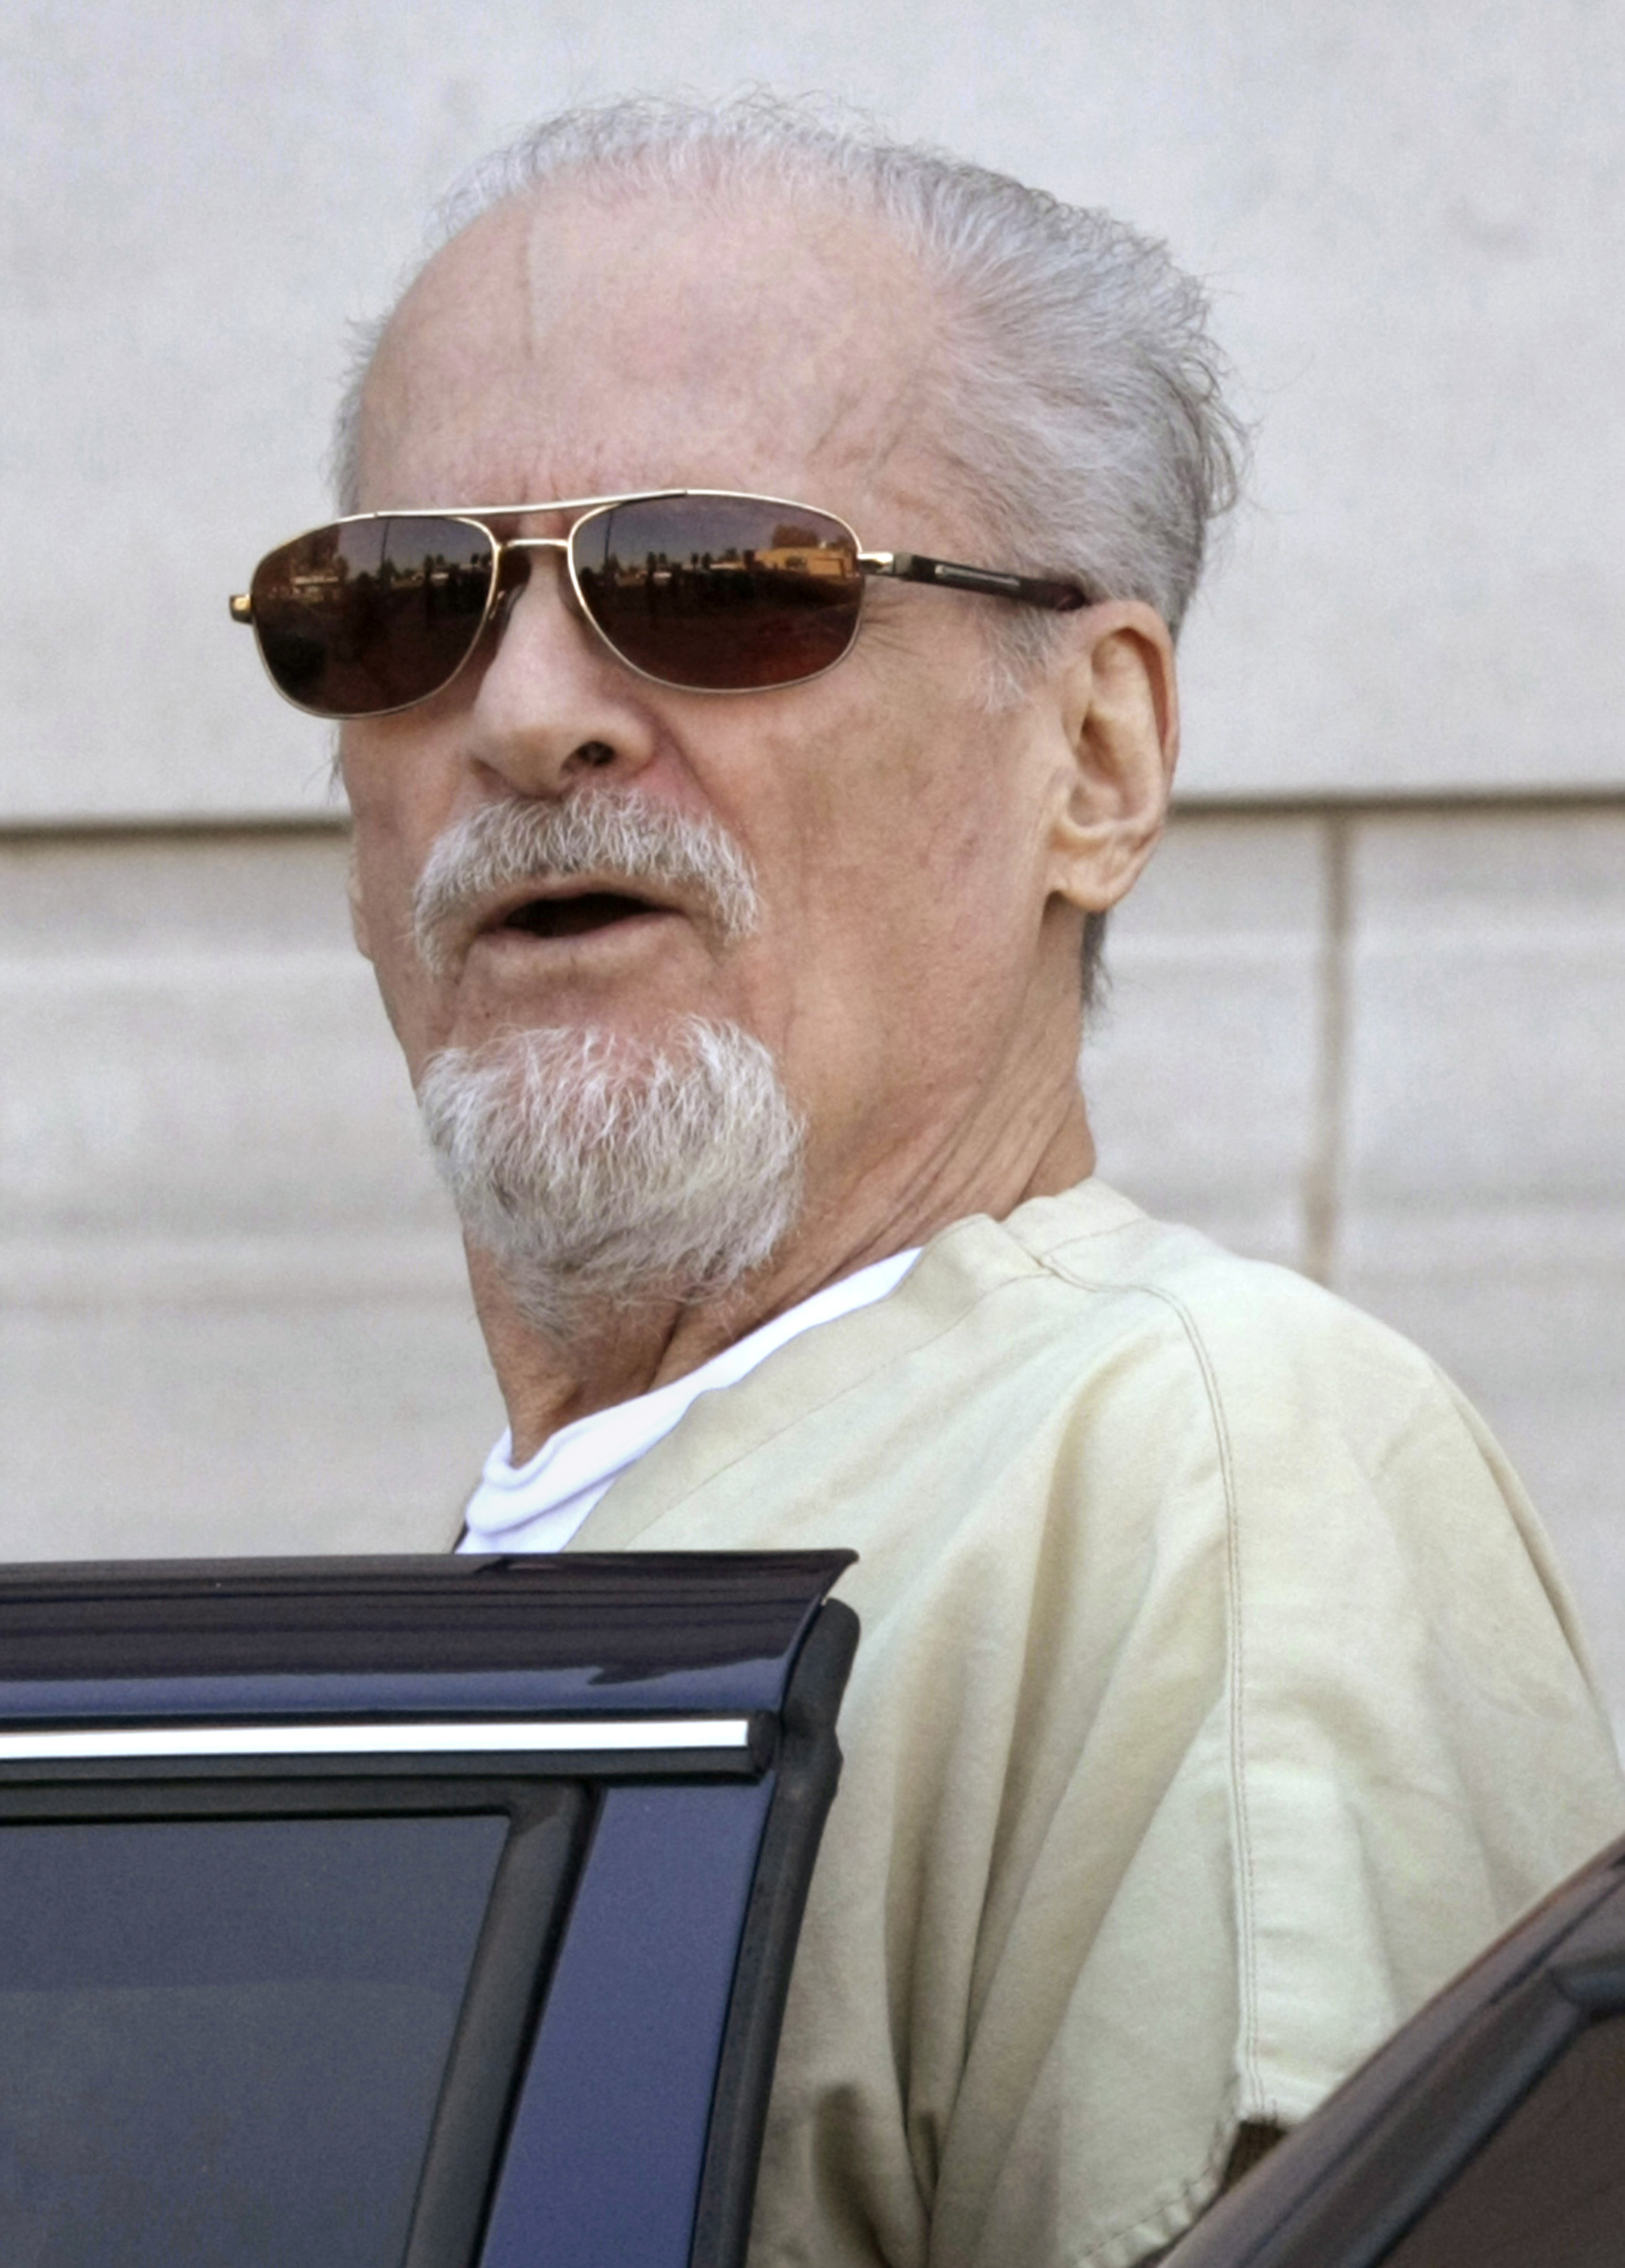 Tony Alamo talks to reporters as he is escorted to a waiting police car outside the federal courthouse in Texarkana, Ark. on July 23, 2009. (Danny Johnston—AP)